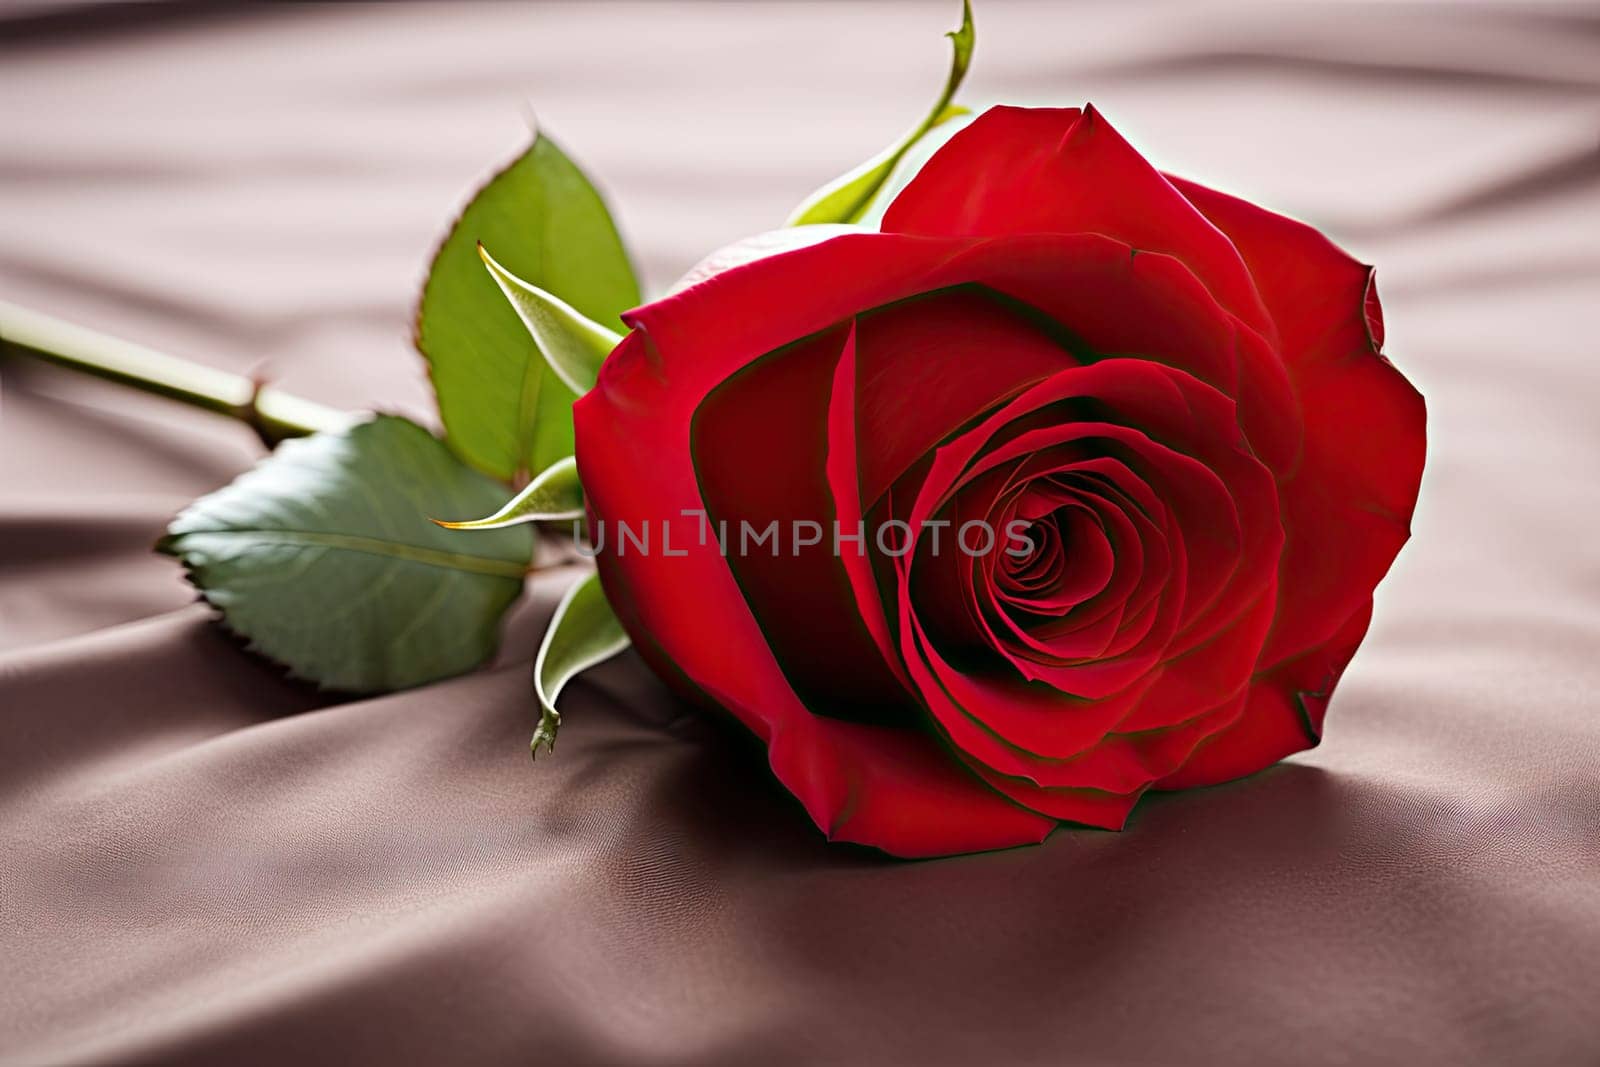 A single red rose sitting on top of a bed by golibtolibov